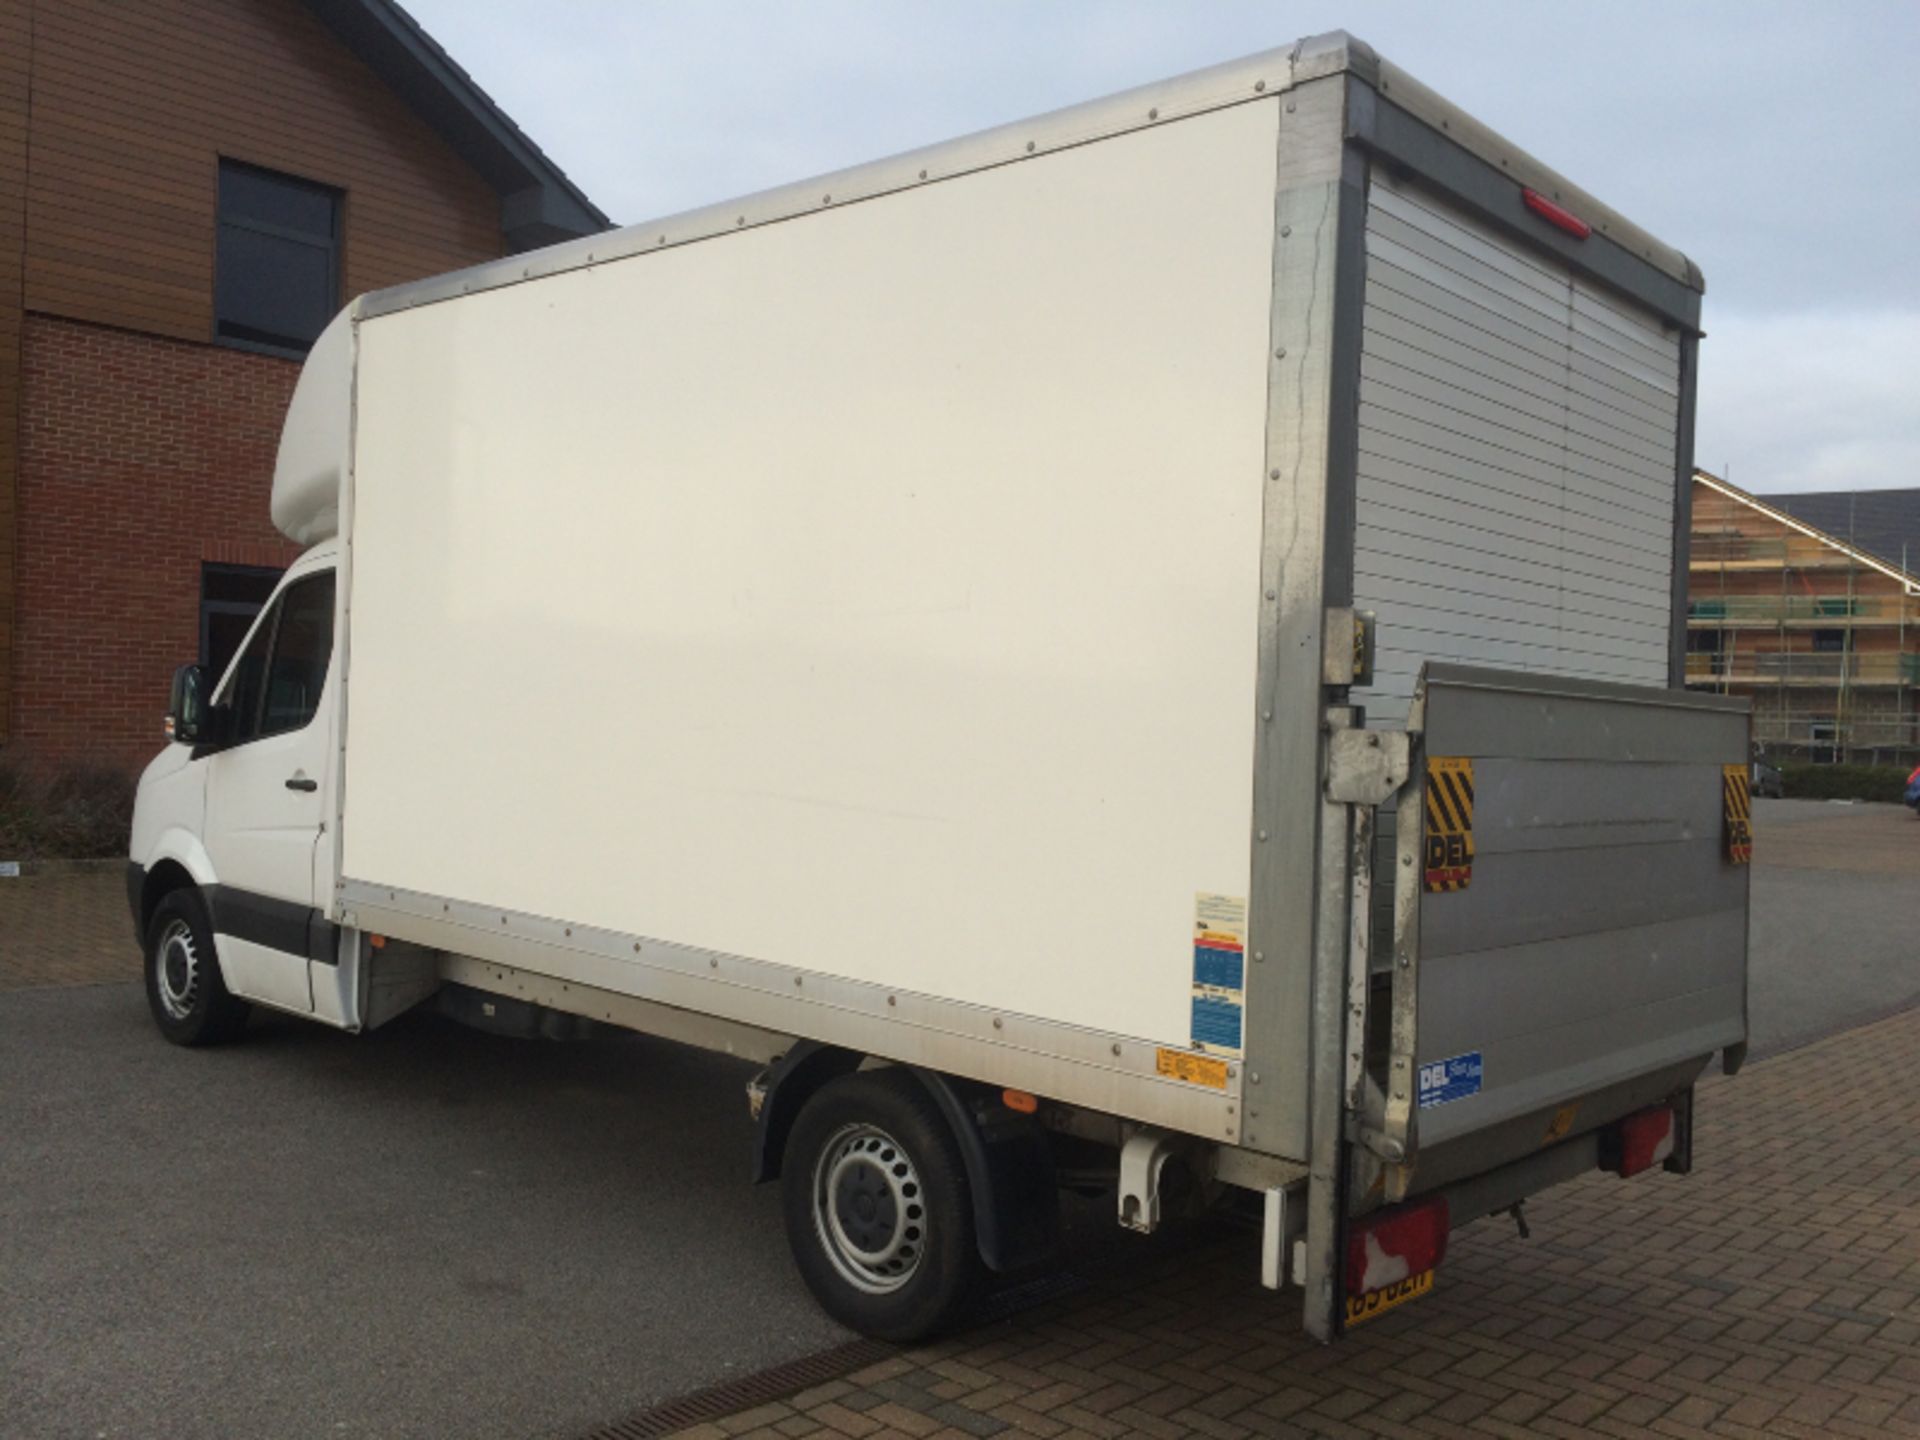 VOLKSWAGEN CRAFTER CR35 2.0TDI "109 BHP" LWB LUTON WITH ELECTRIC TAILIFT "2014 MODEL" LOW MILEAGE - Image 4 of 10